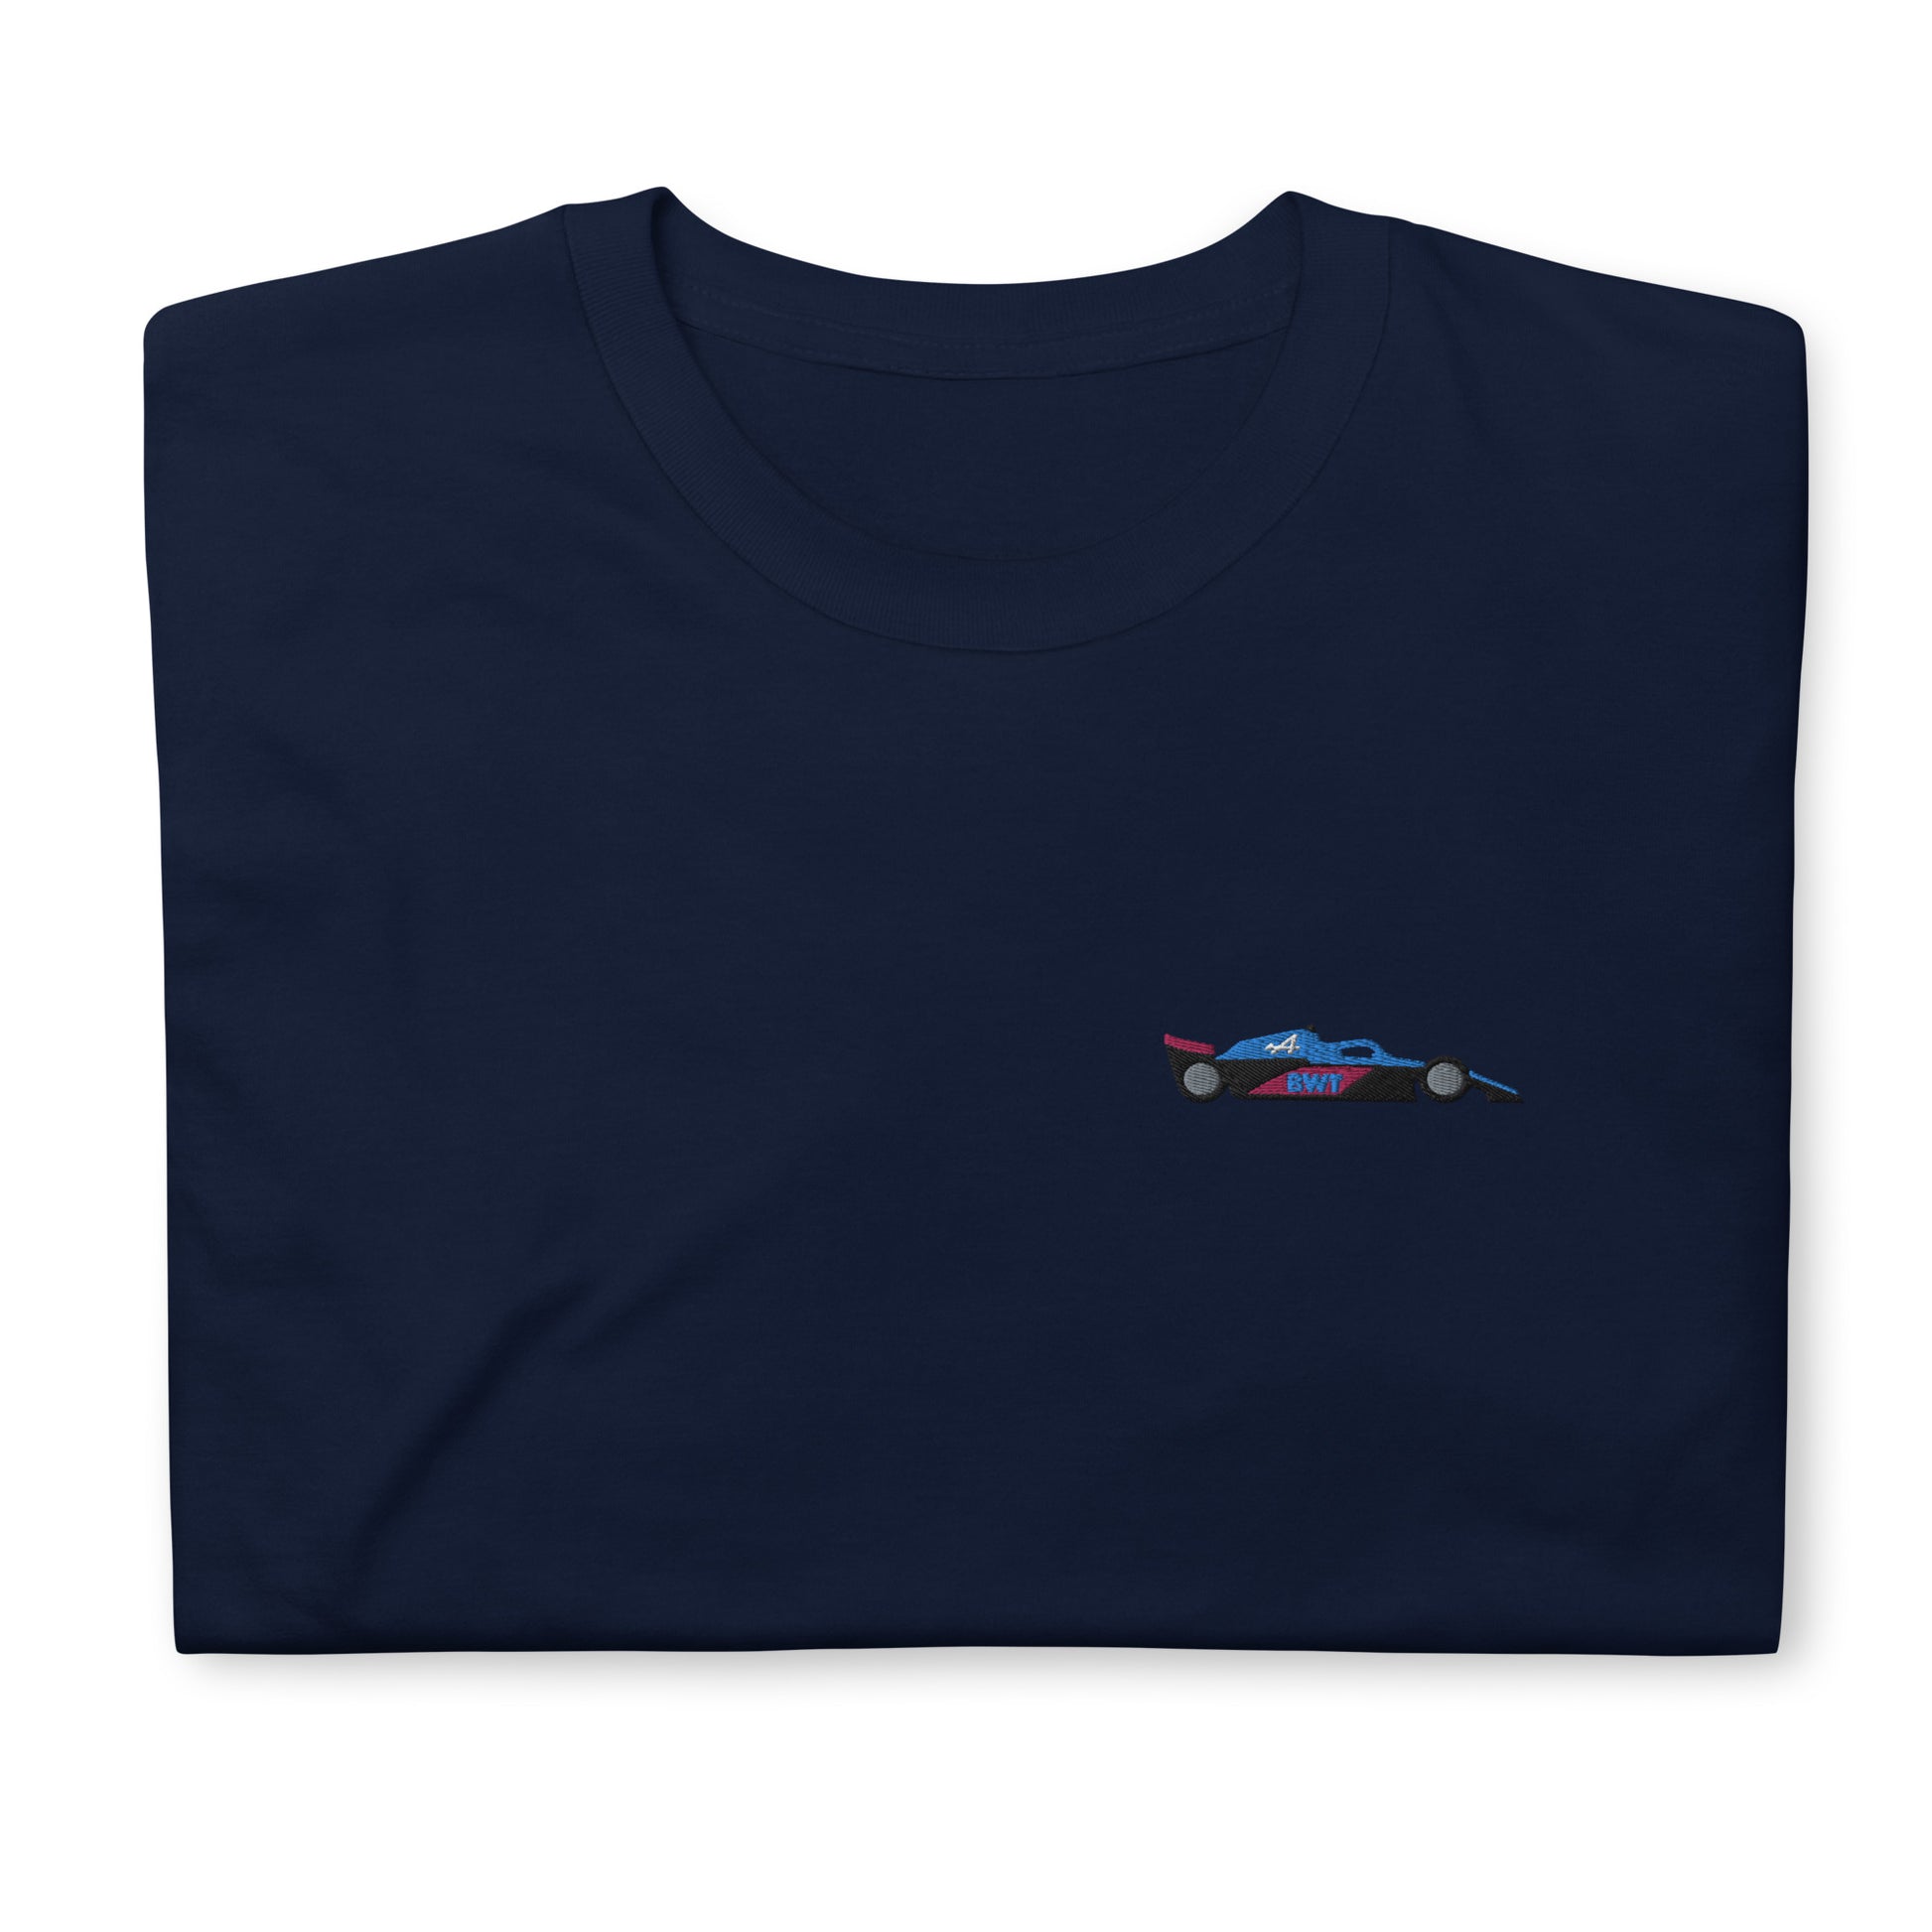 Embroidered Alpine F1 Car Unisex T-Shirt navy blue front